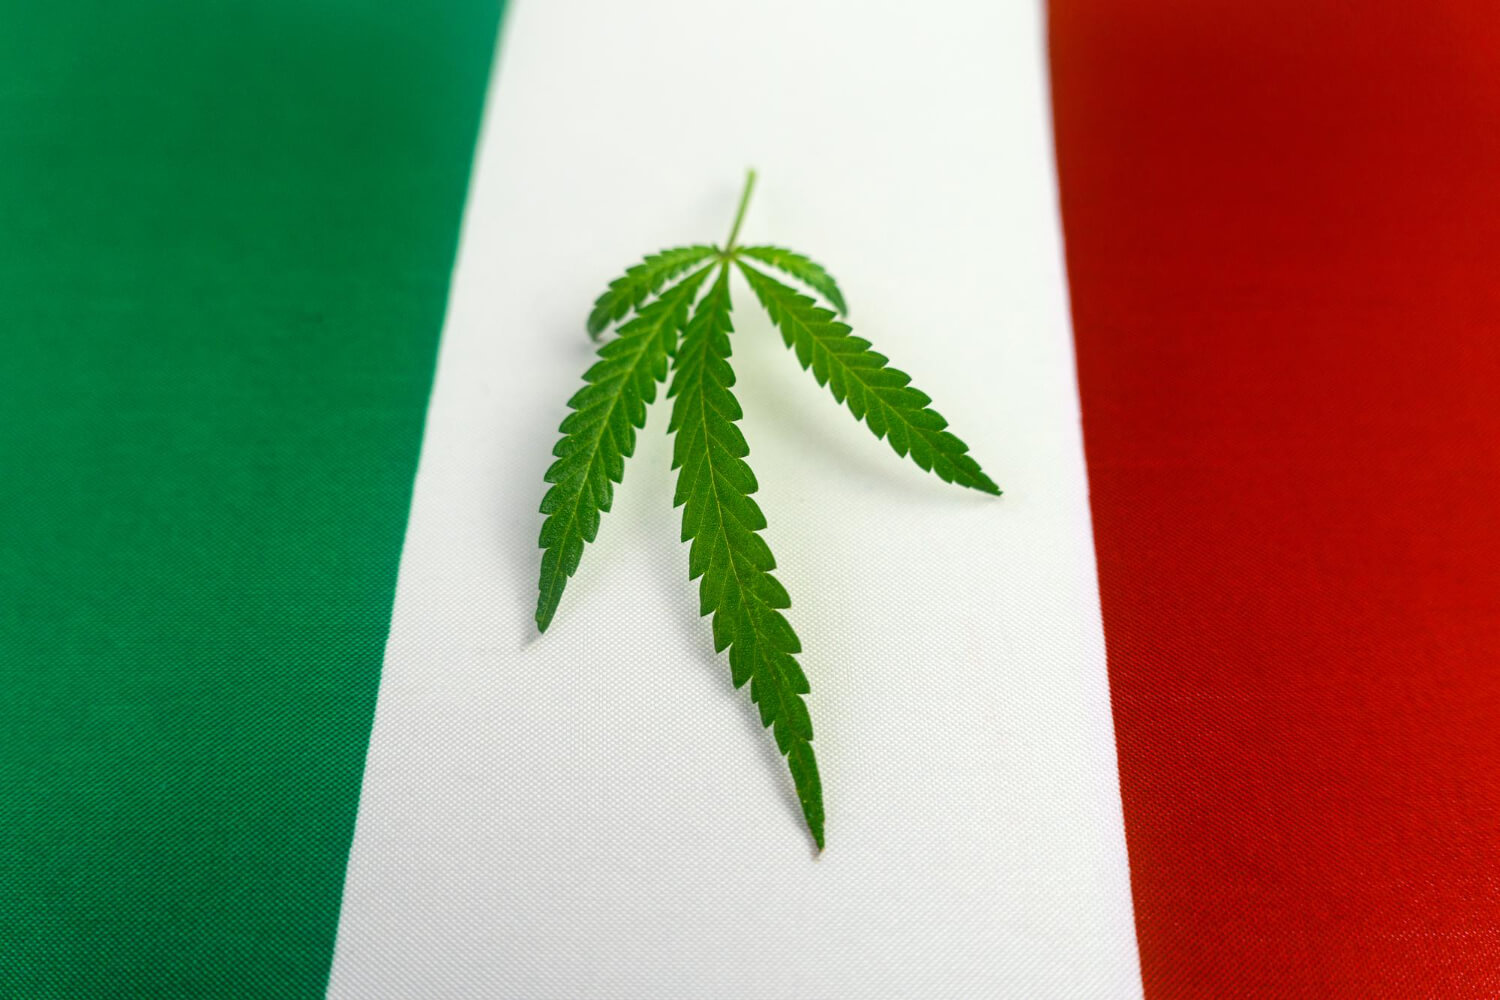 Is weed legal in Italy?